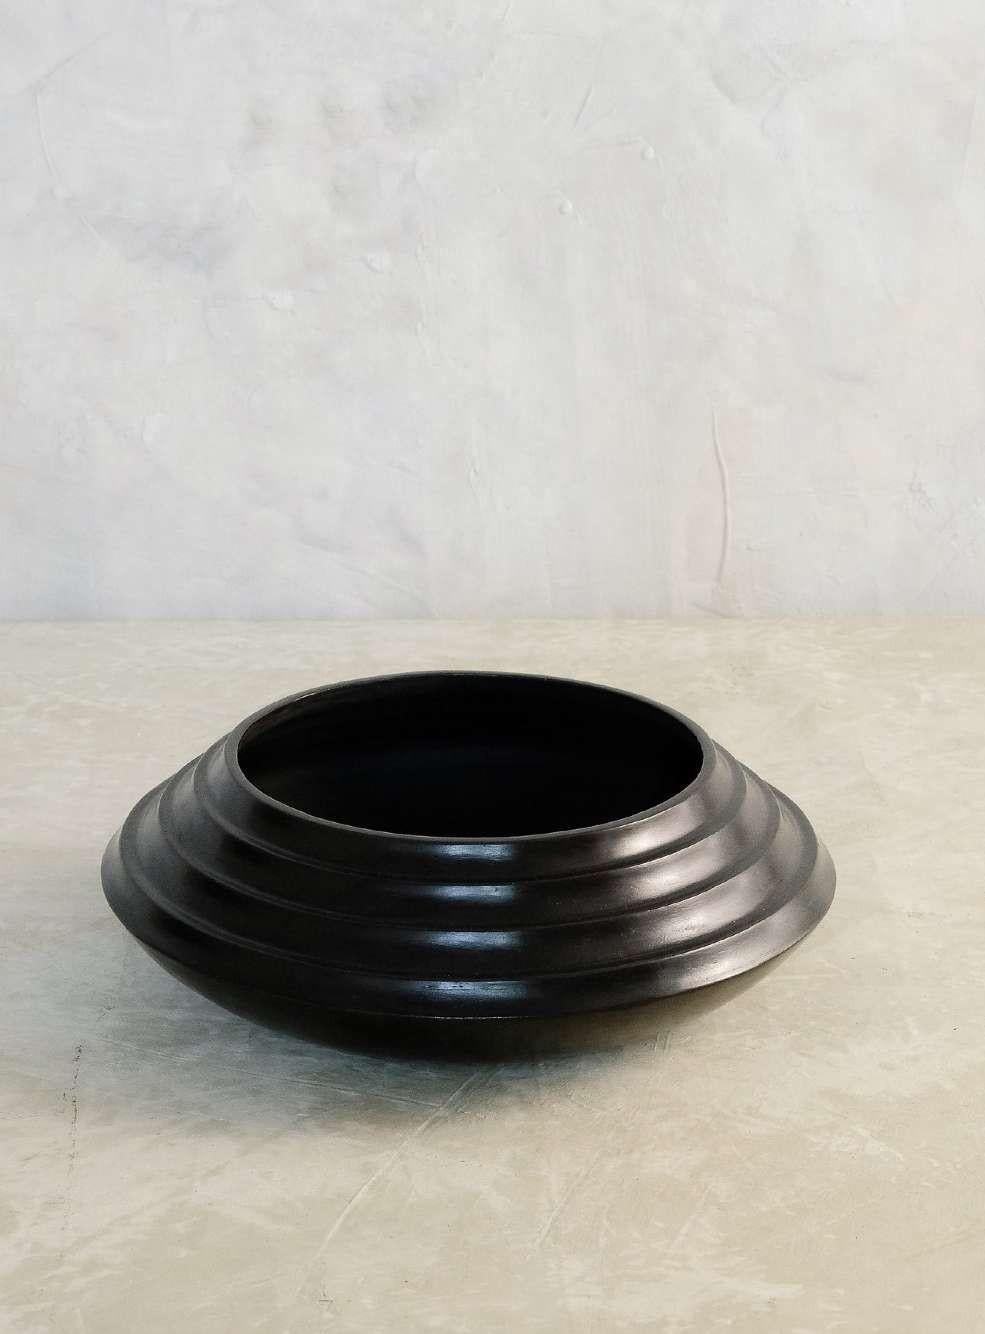 Cascabel bowl by Onora
Dimensions: D 30 x H 10 cm
Materials: Clay

This collection reinterprets one of the oldest structural techniques in pottery, coiling, the vessels made with this technique are made from coils of clay positioned in